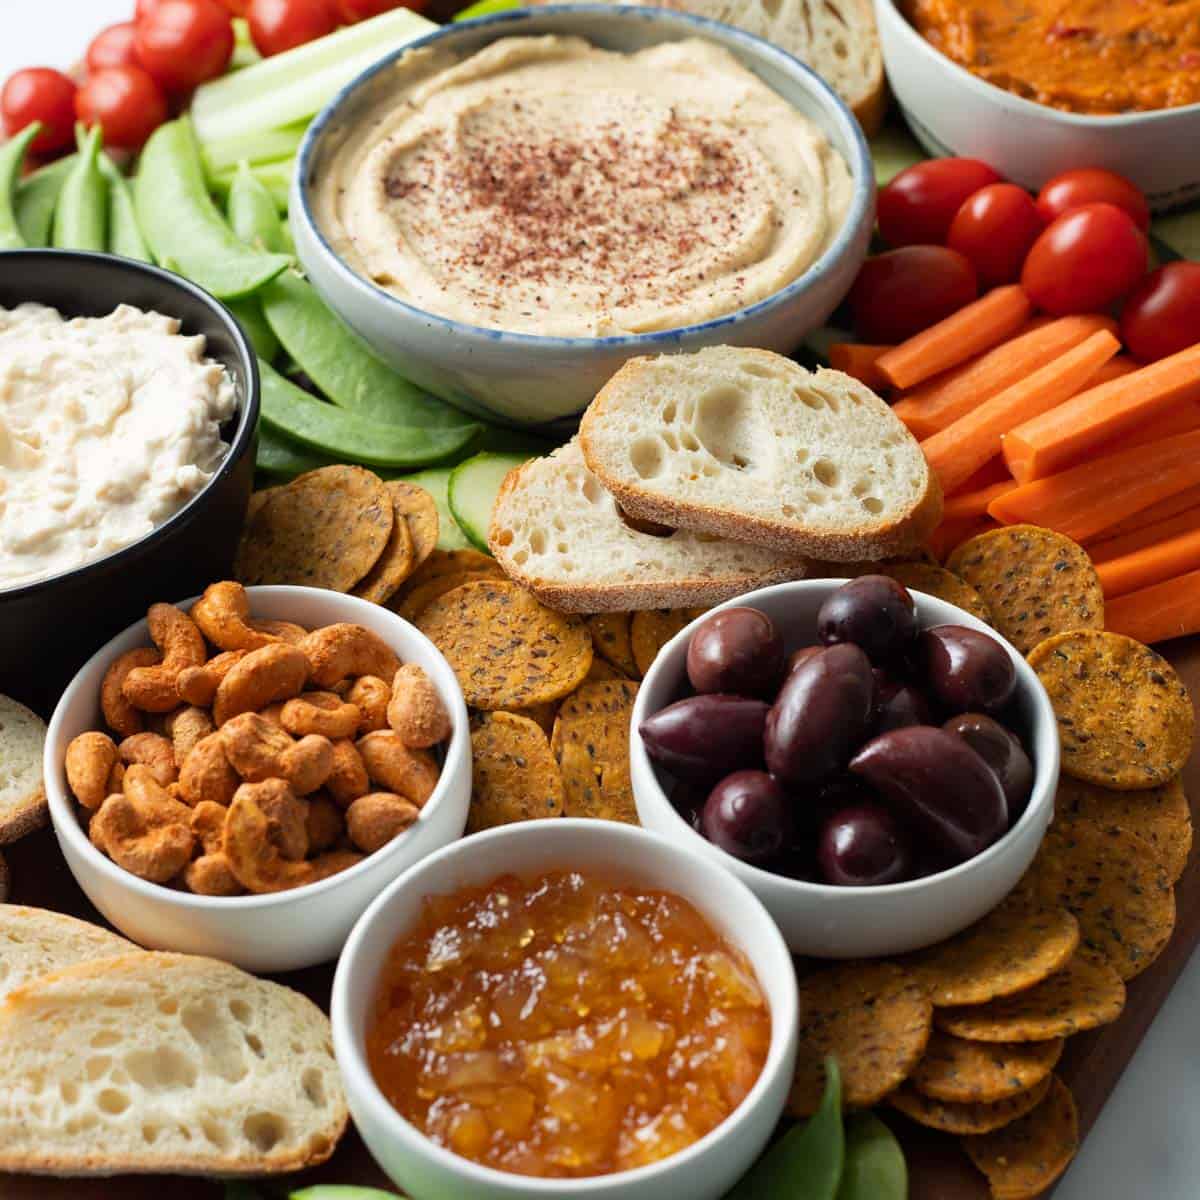 Vegan charcuterie board willed with dips, nuts, olives, crackers, and veggies.
